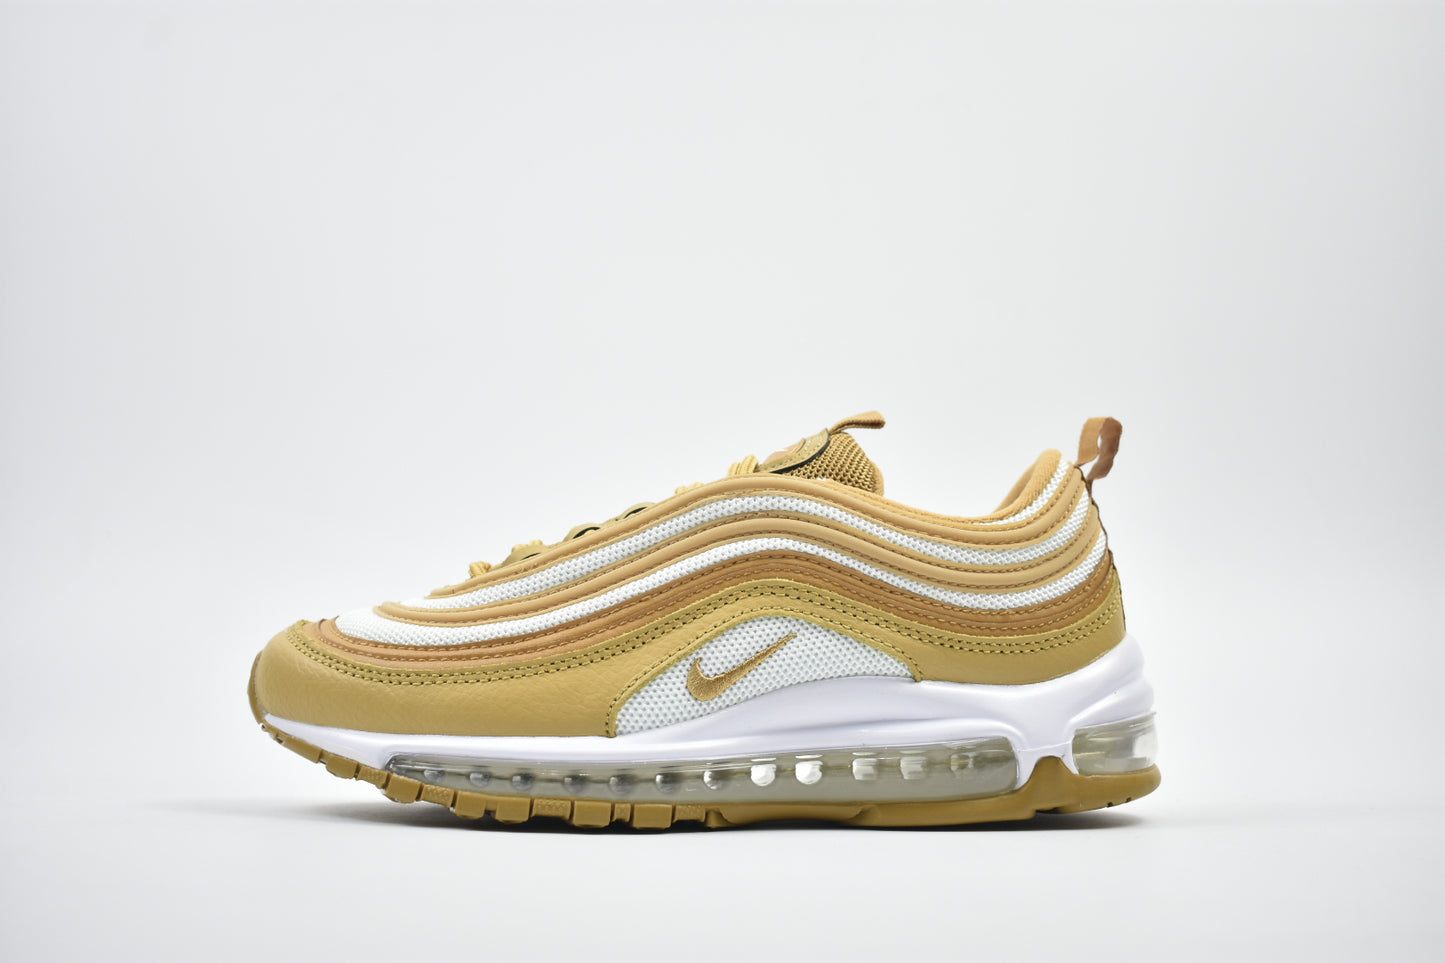 Air max 97 - whatever on 